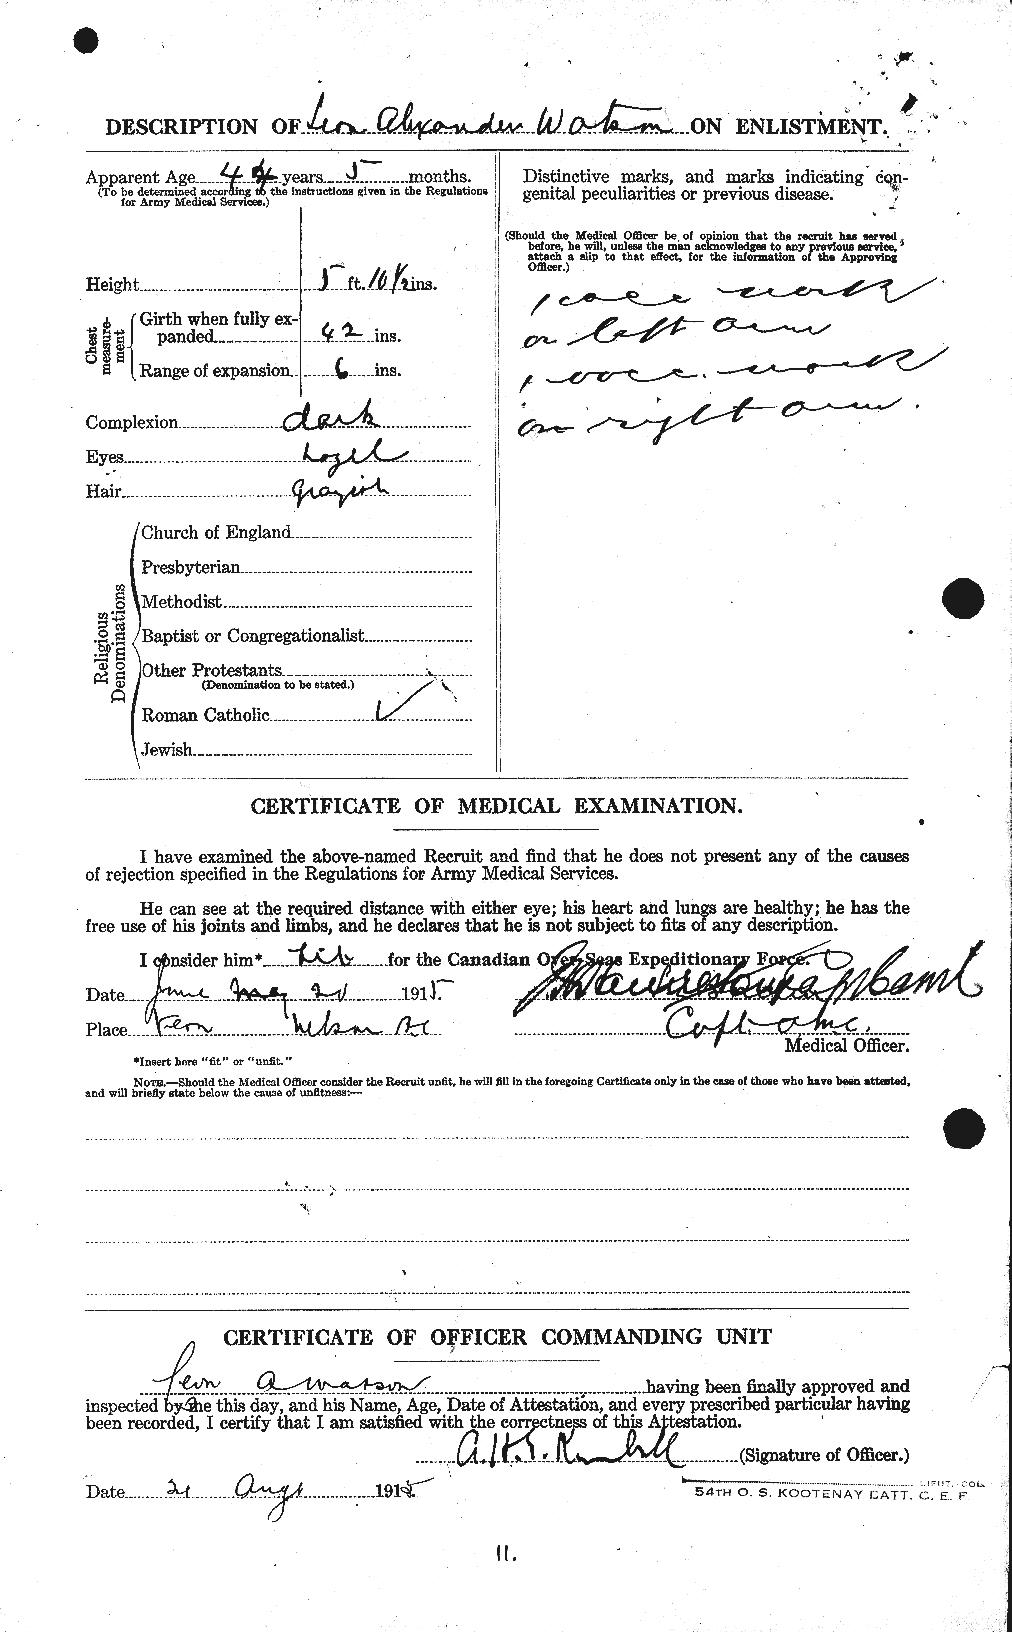 Personnel Records of the First World War - CEF 661092b